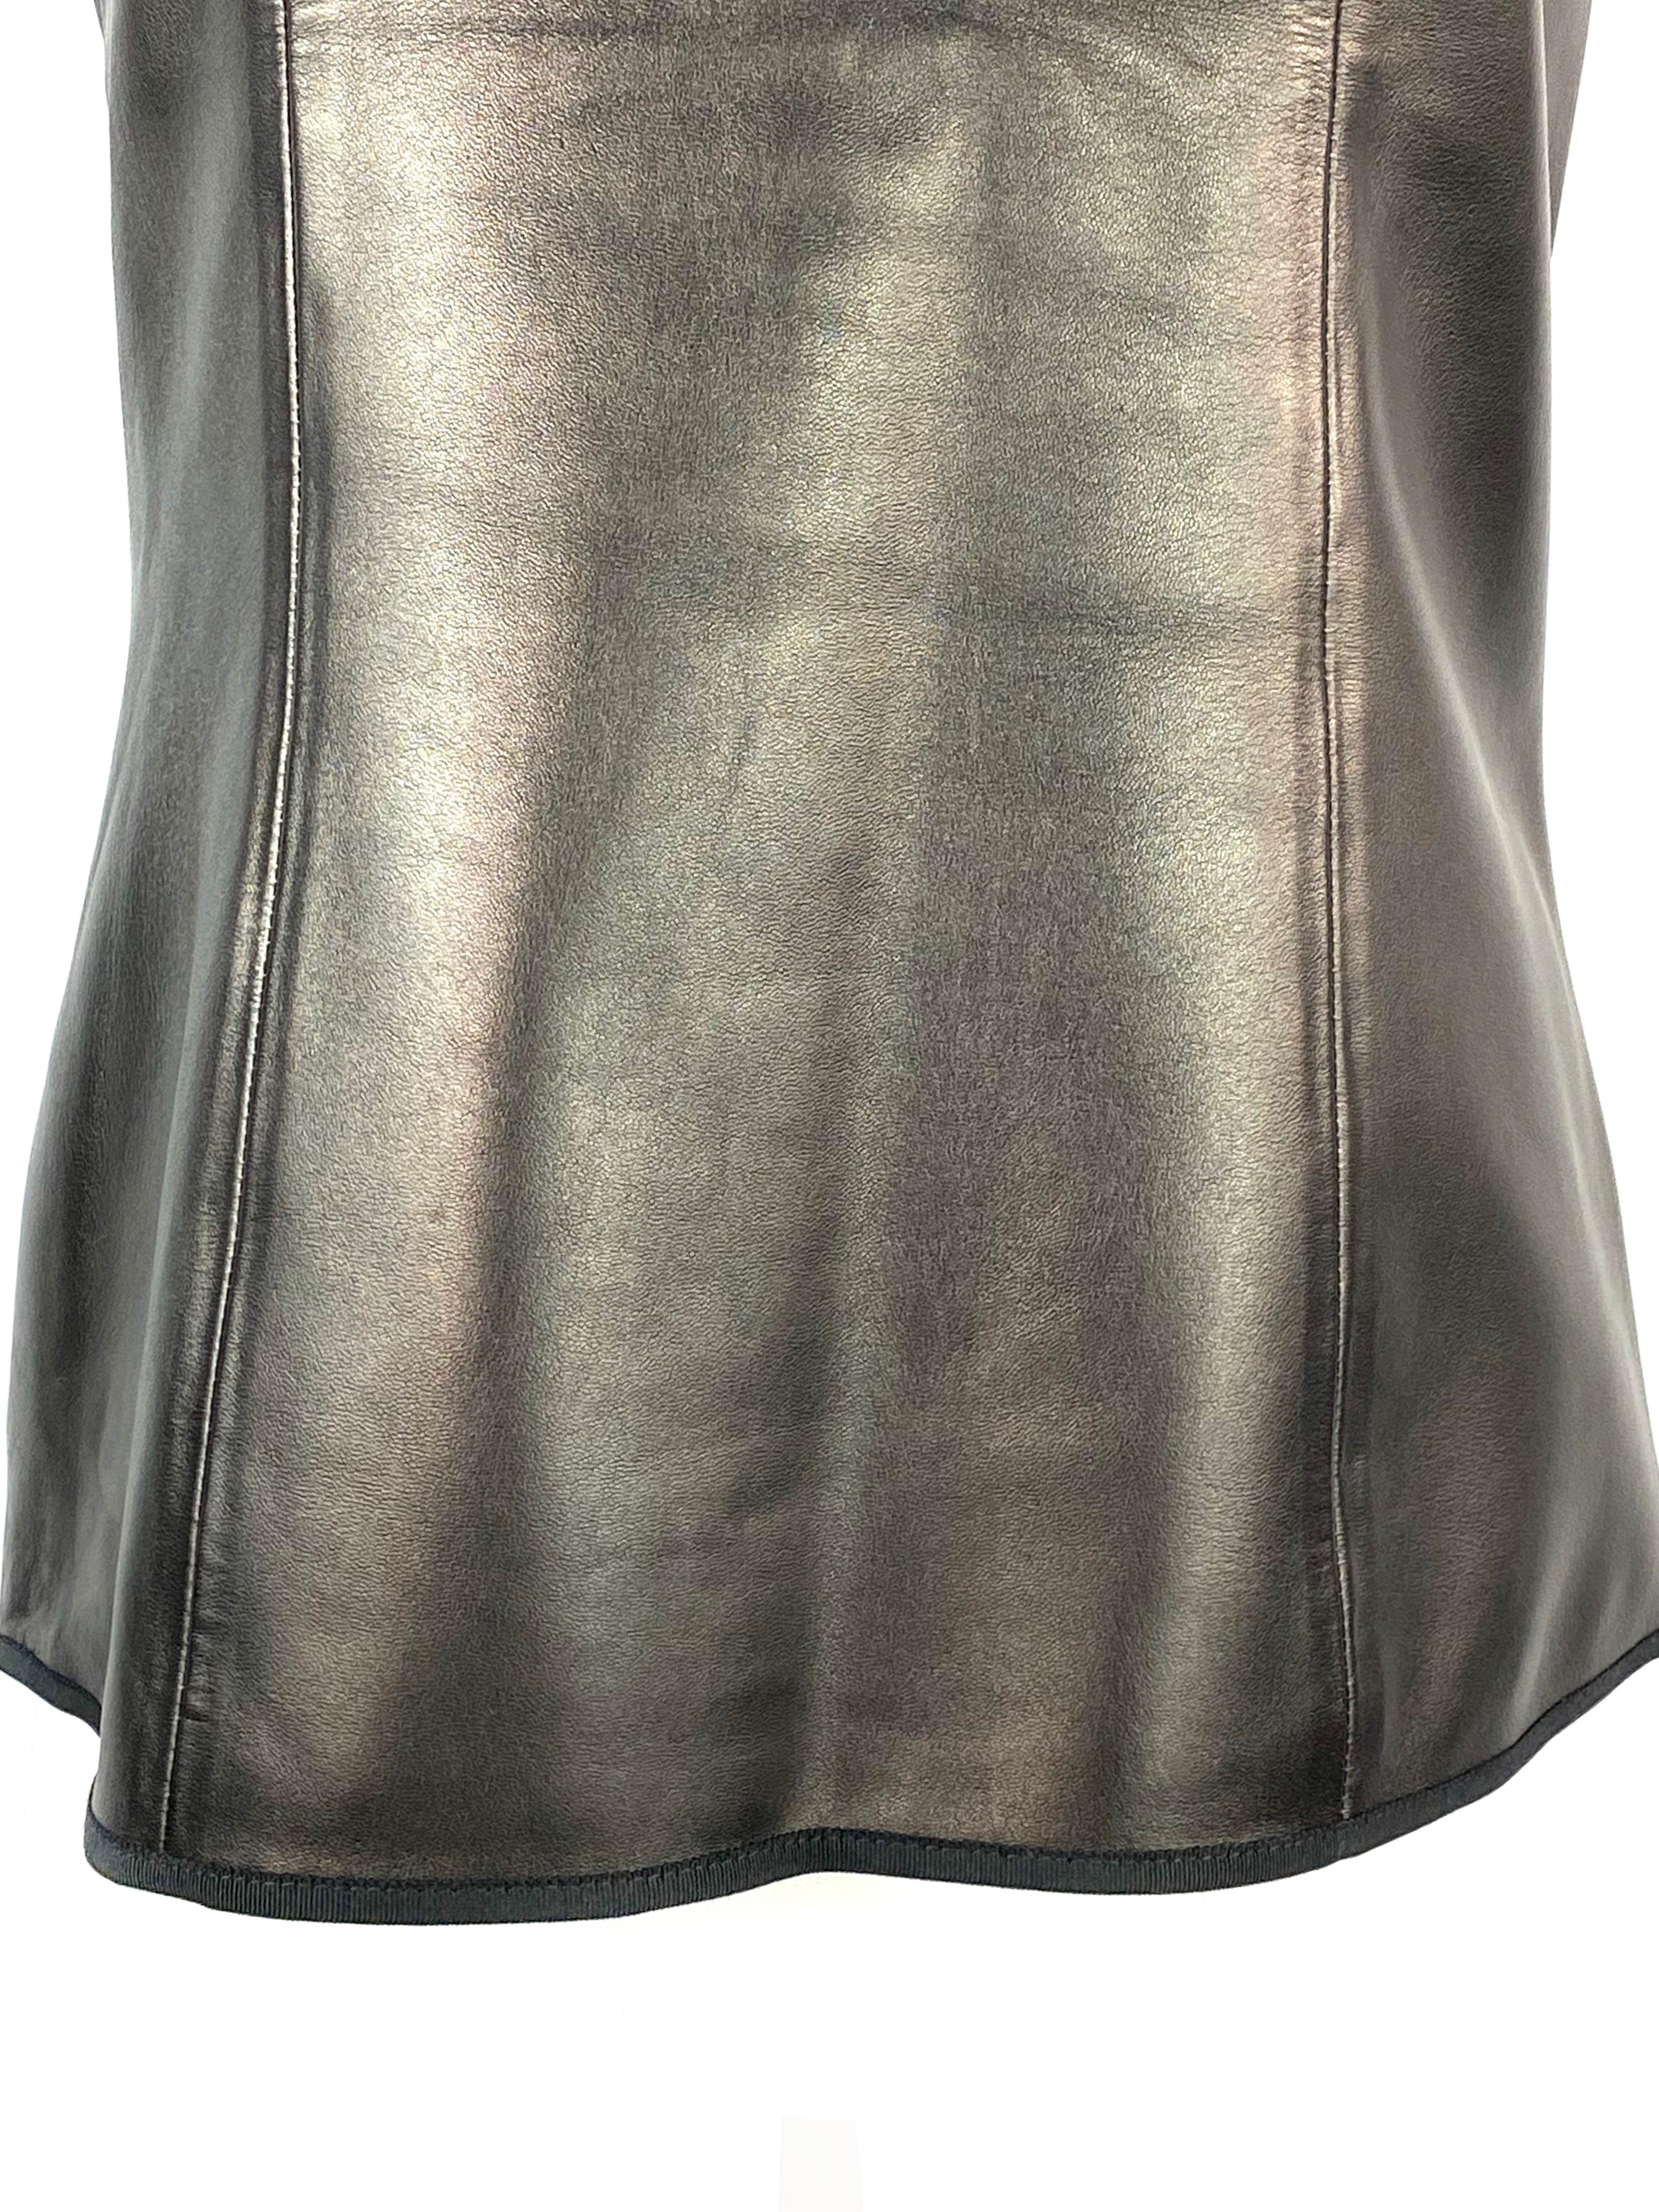 THE ROW Black Lambskin Leather Sleeveless Top Size 8

Product details:
Size 8
Black lambskin leather
Sleeveless 
Rear zip closure 
Made in USA

